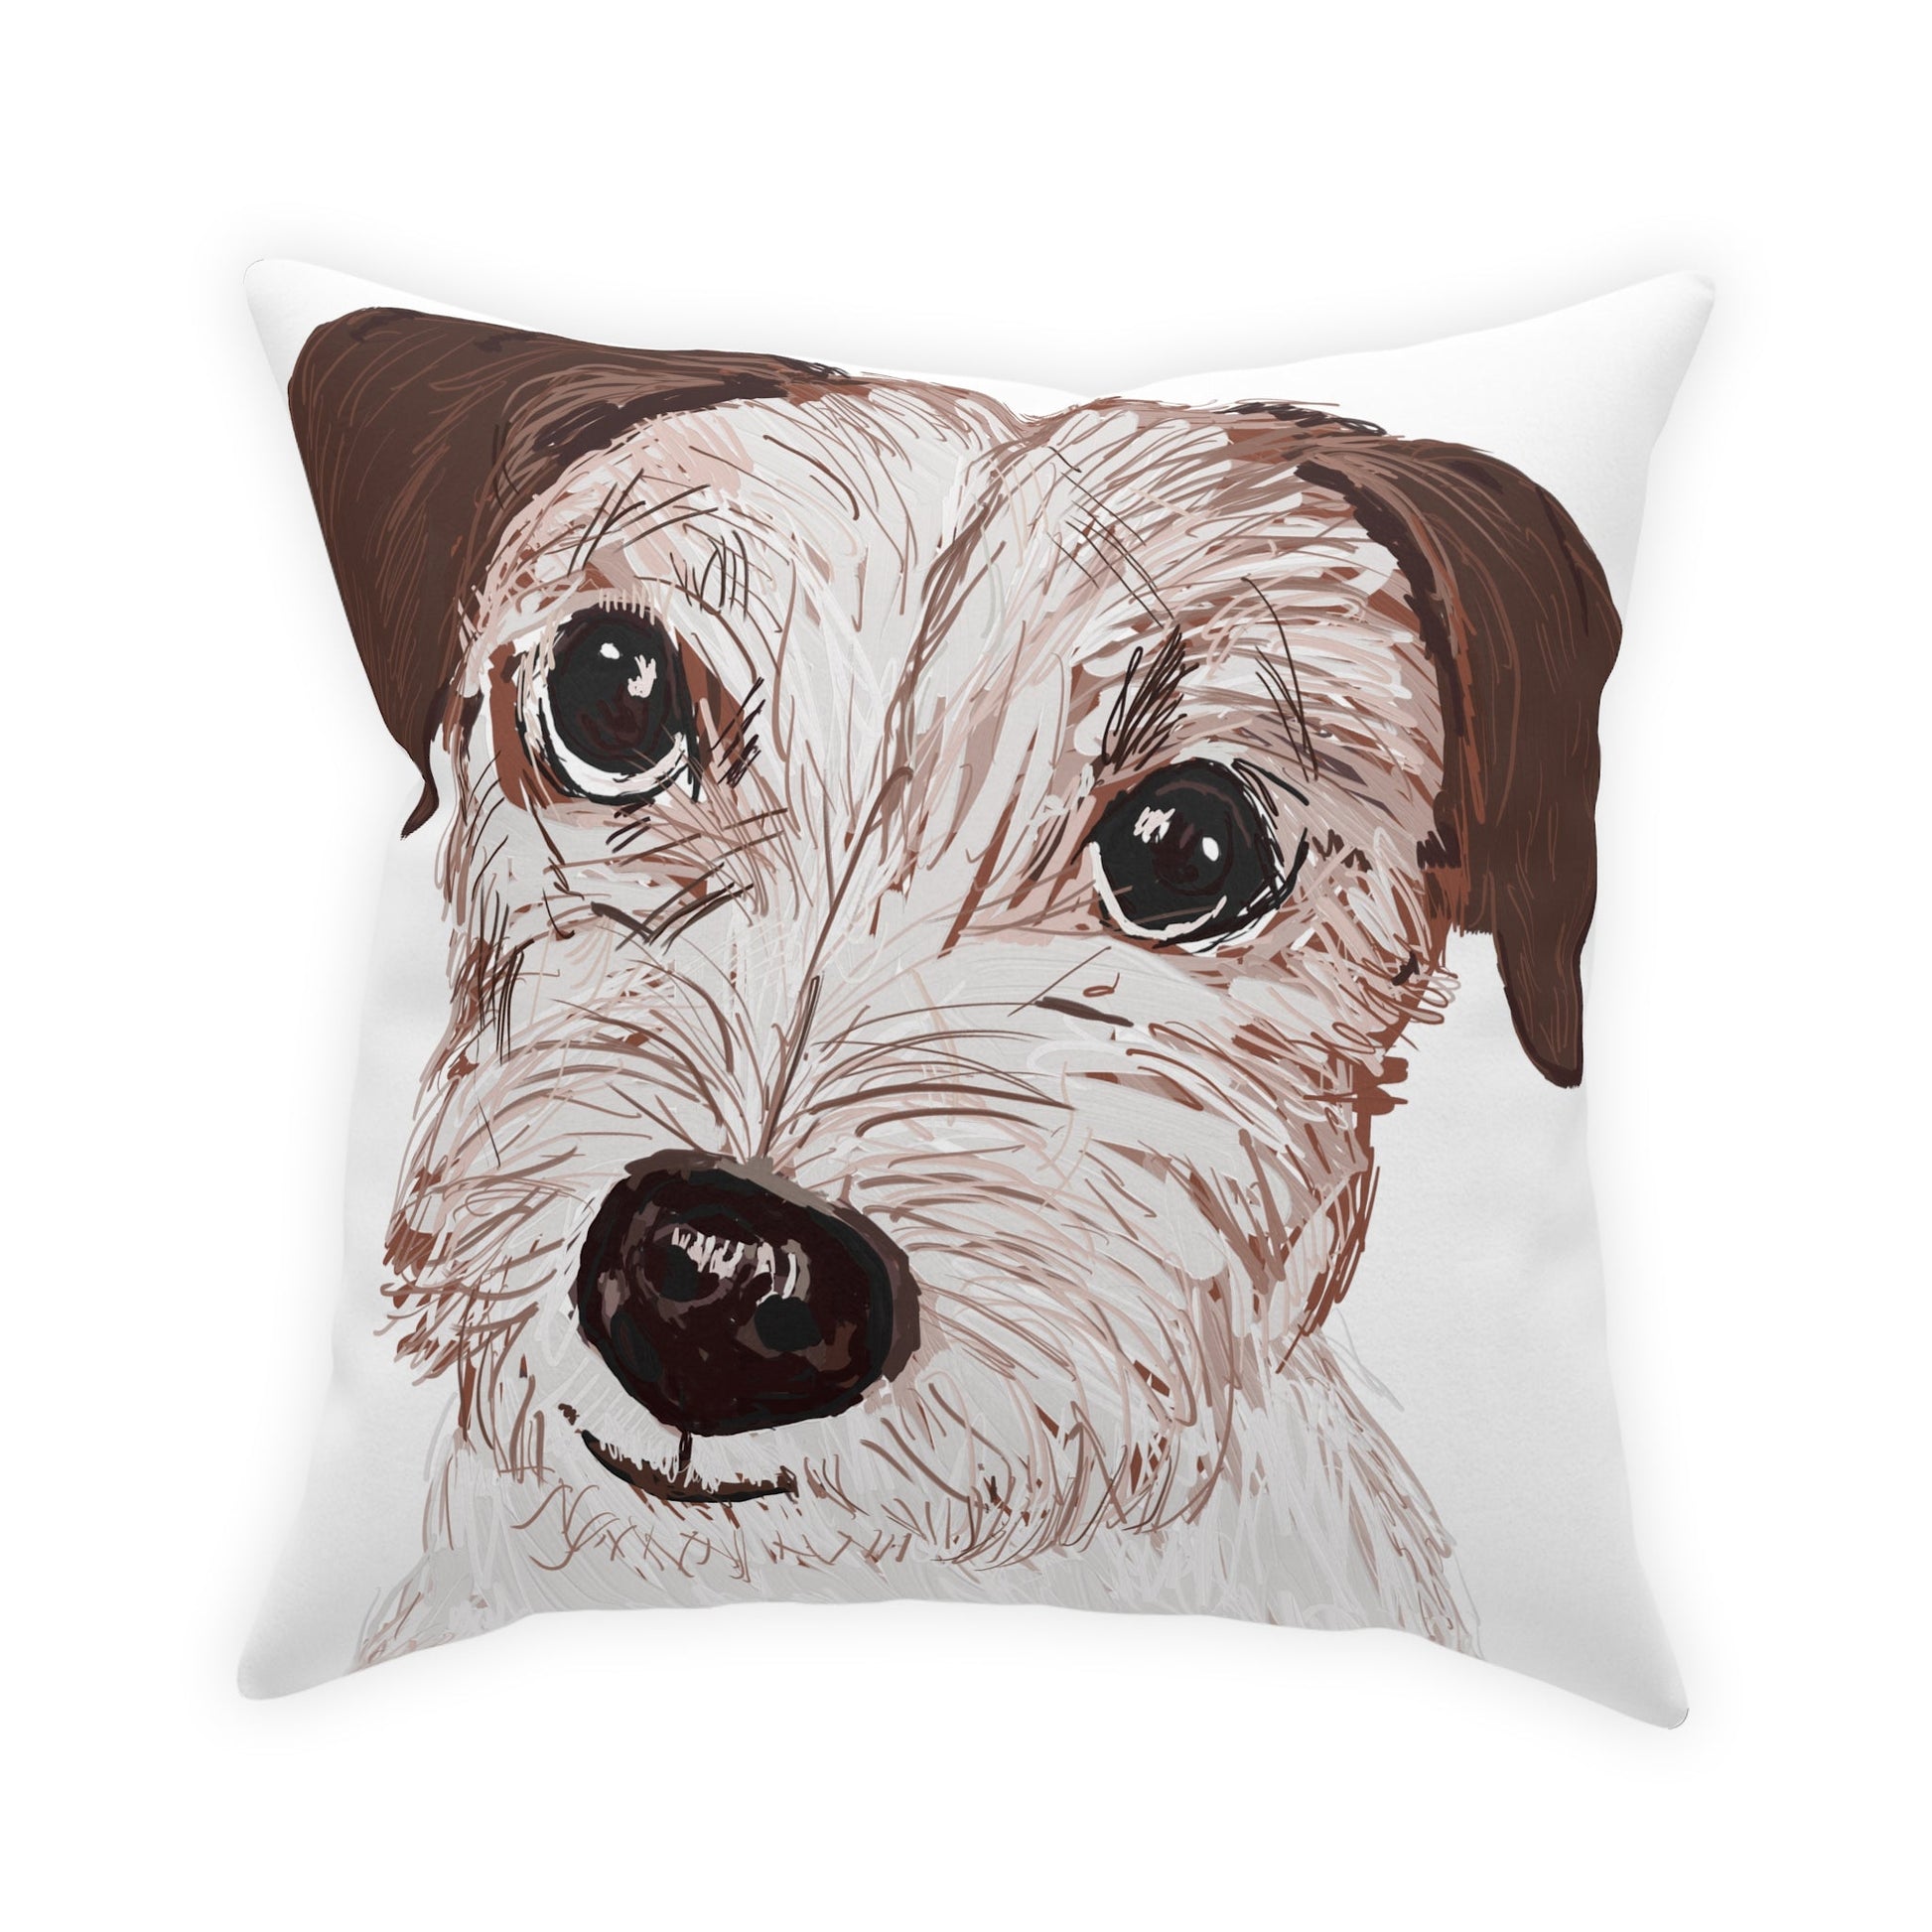 Jack Russell Broadcloth Pillow - Blue Cava